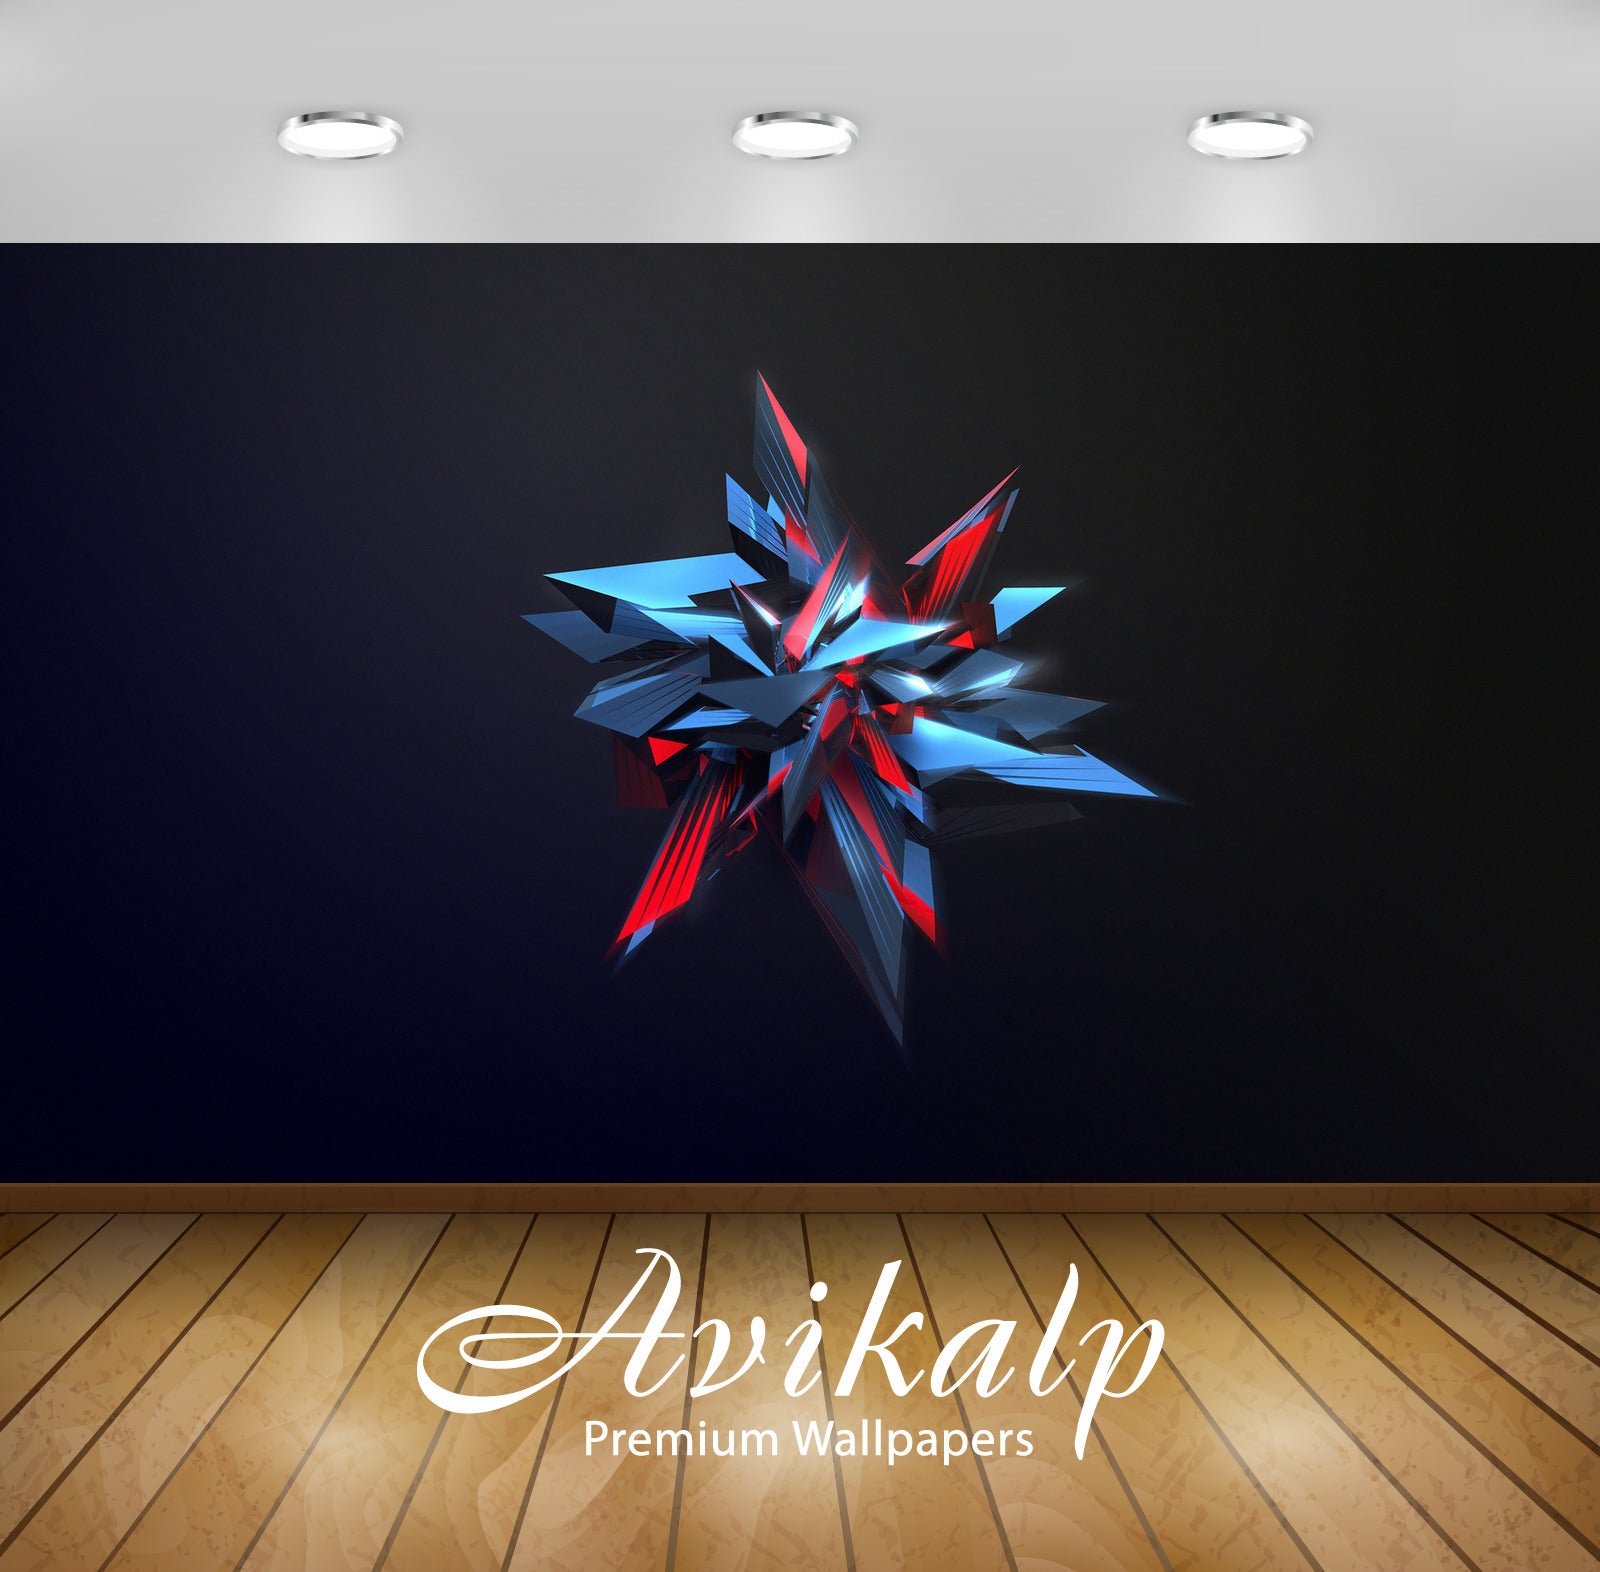 Avikalp Exclusive Awi4638 Star Full HD Wallpapers for Living room, Hall, Kids Room, Kitchen, TV Back